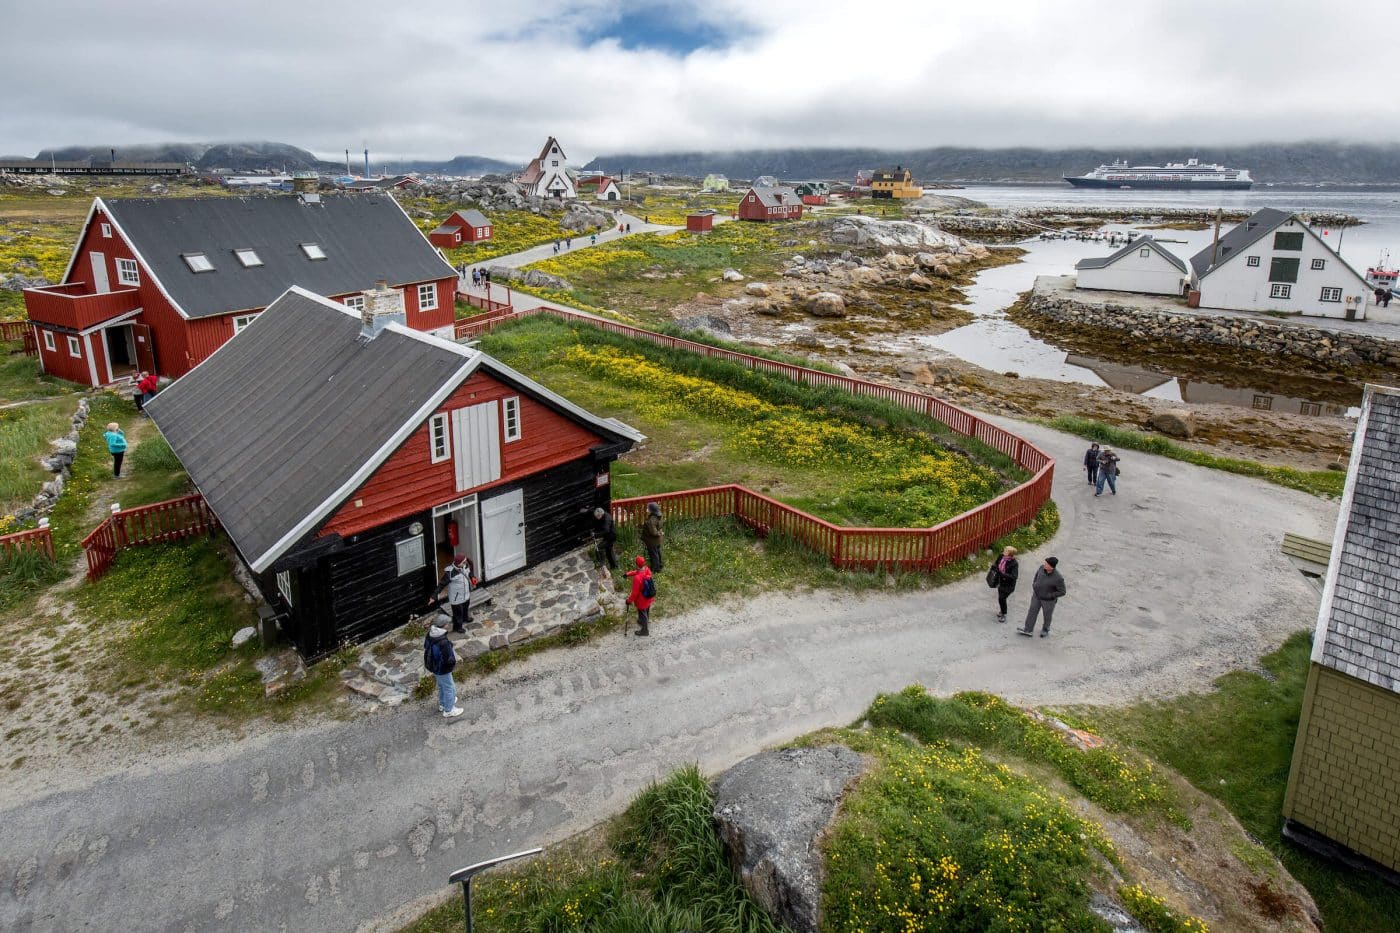 Cruise guests from the ship Rotterdam visiting the old museum area of Nanortalik on South Greenland. By Mads Pihl